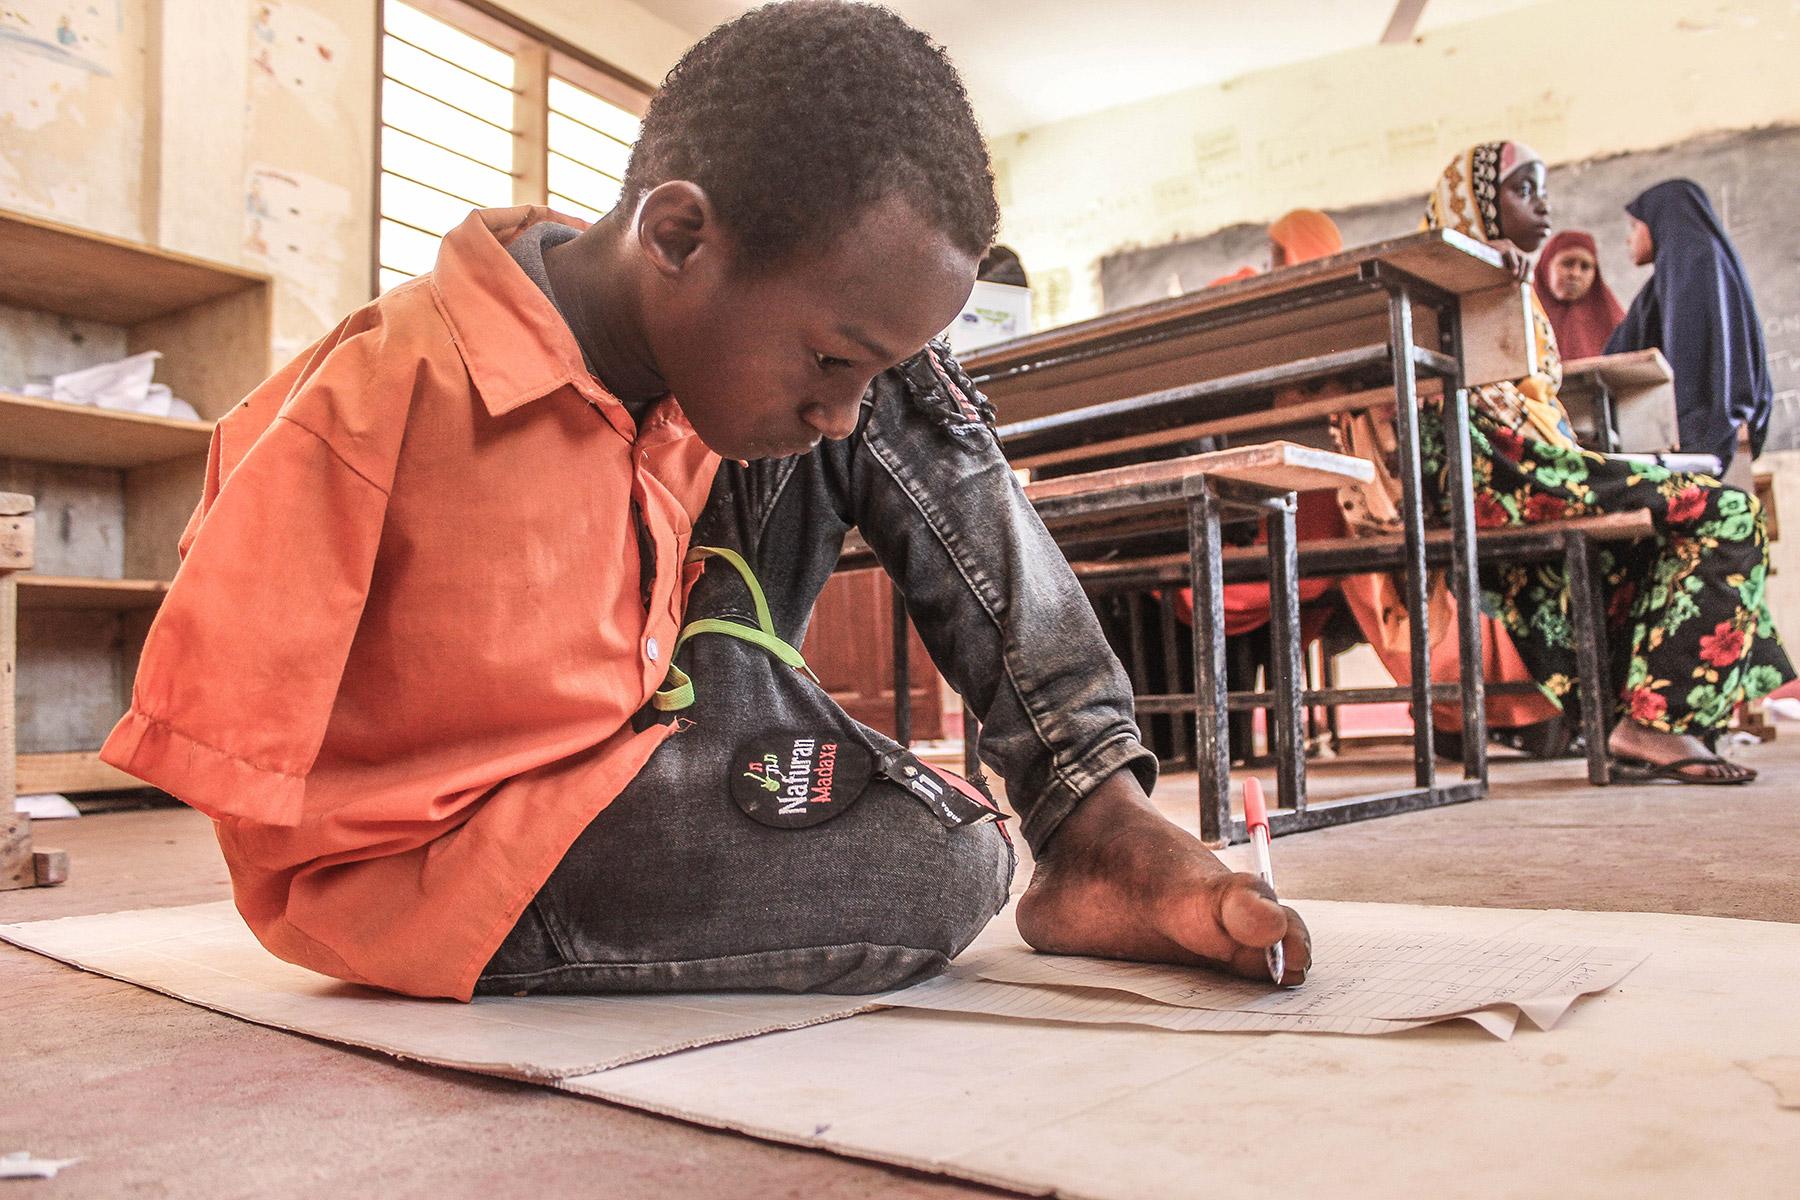 Mohamed has learned to draw with his feet. Photo: LWF/ N. Tado